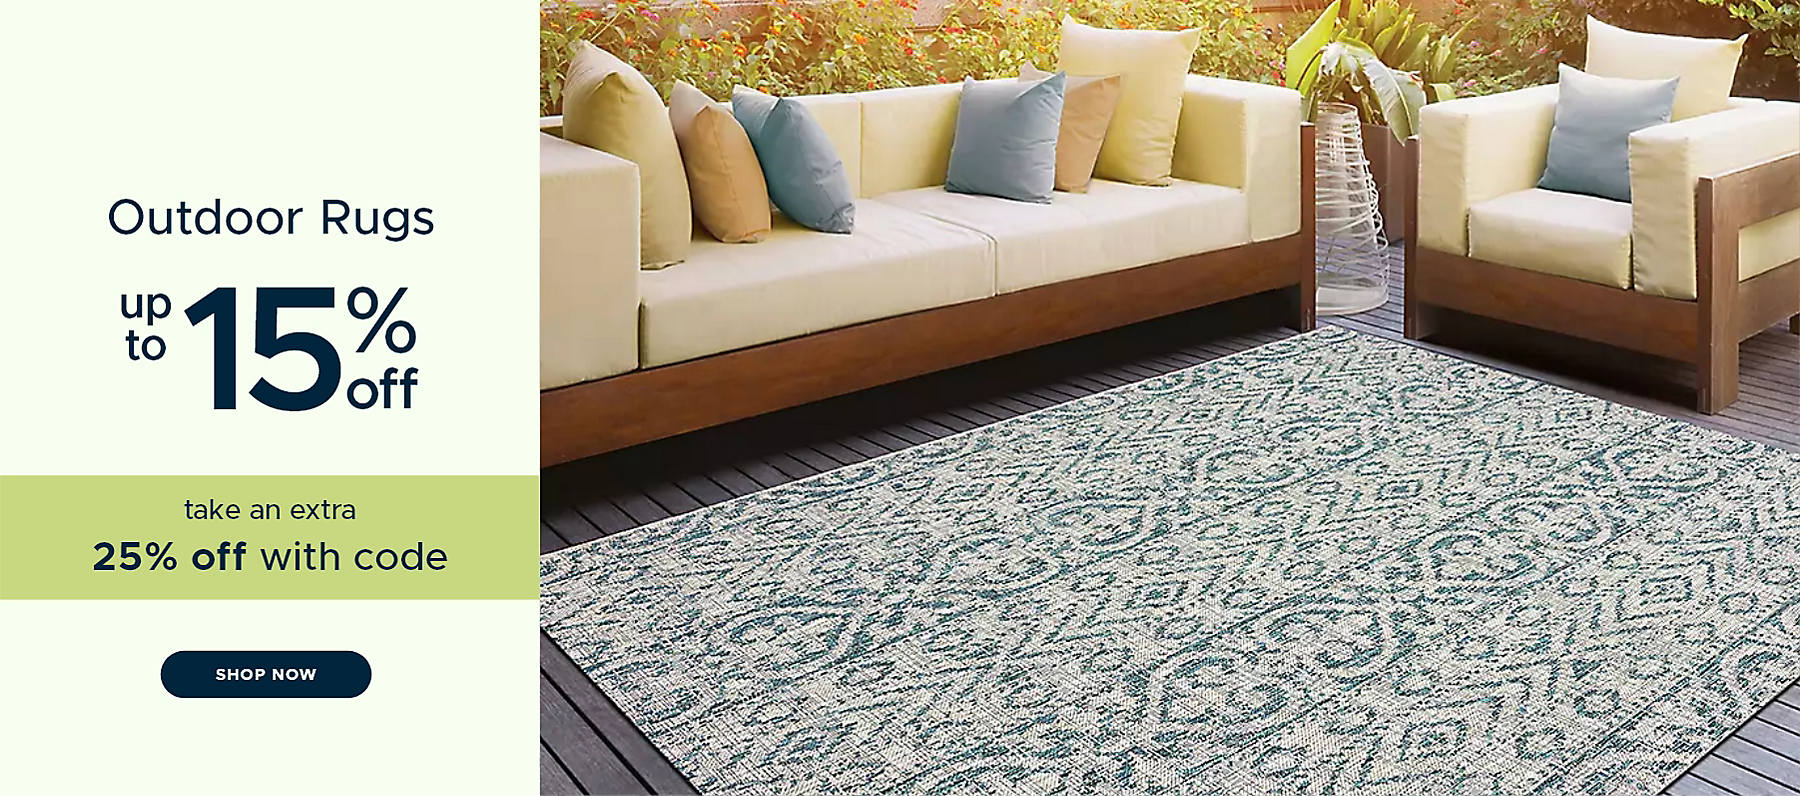 Outdoor Rugs up to 15% off take an extra 25% off with code shop now